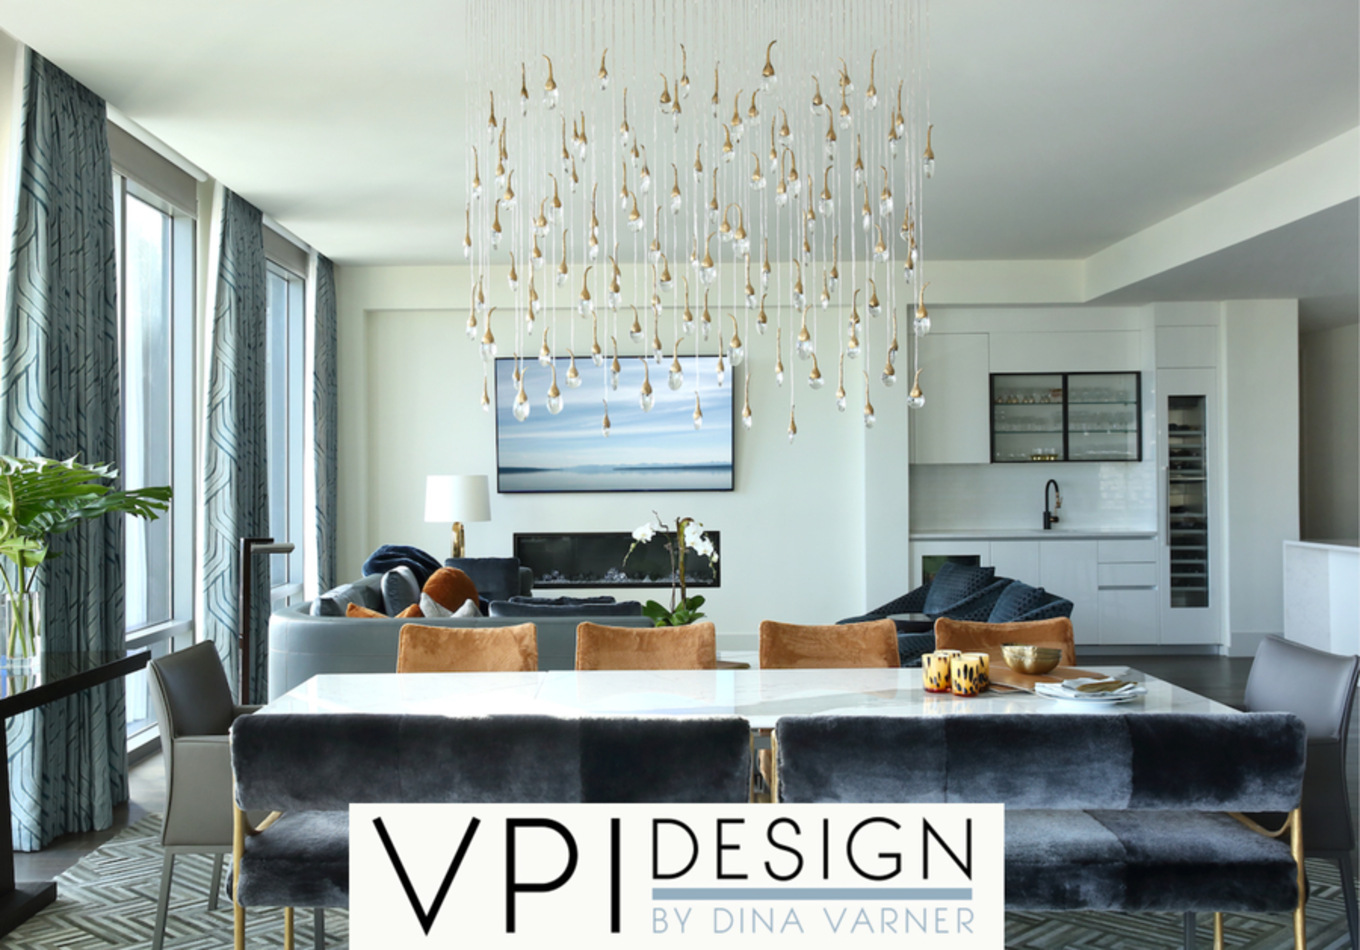 VPI Design, Monday, May 3, 2021, Press release picture